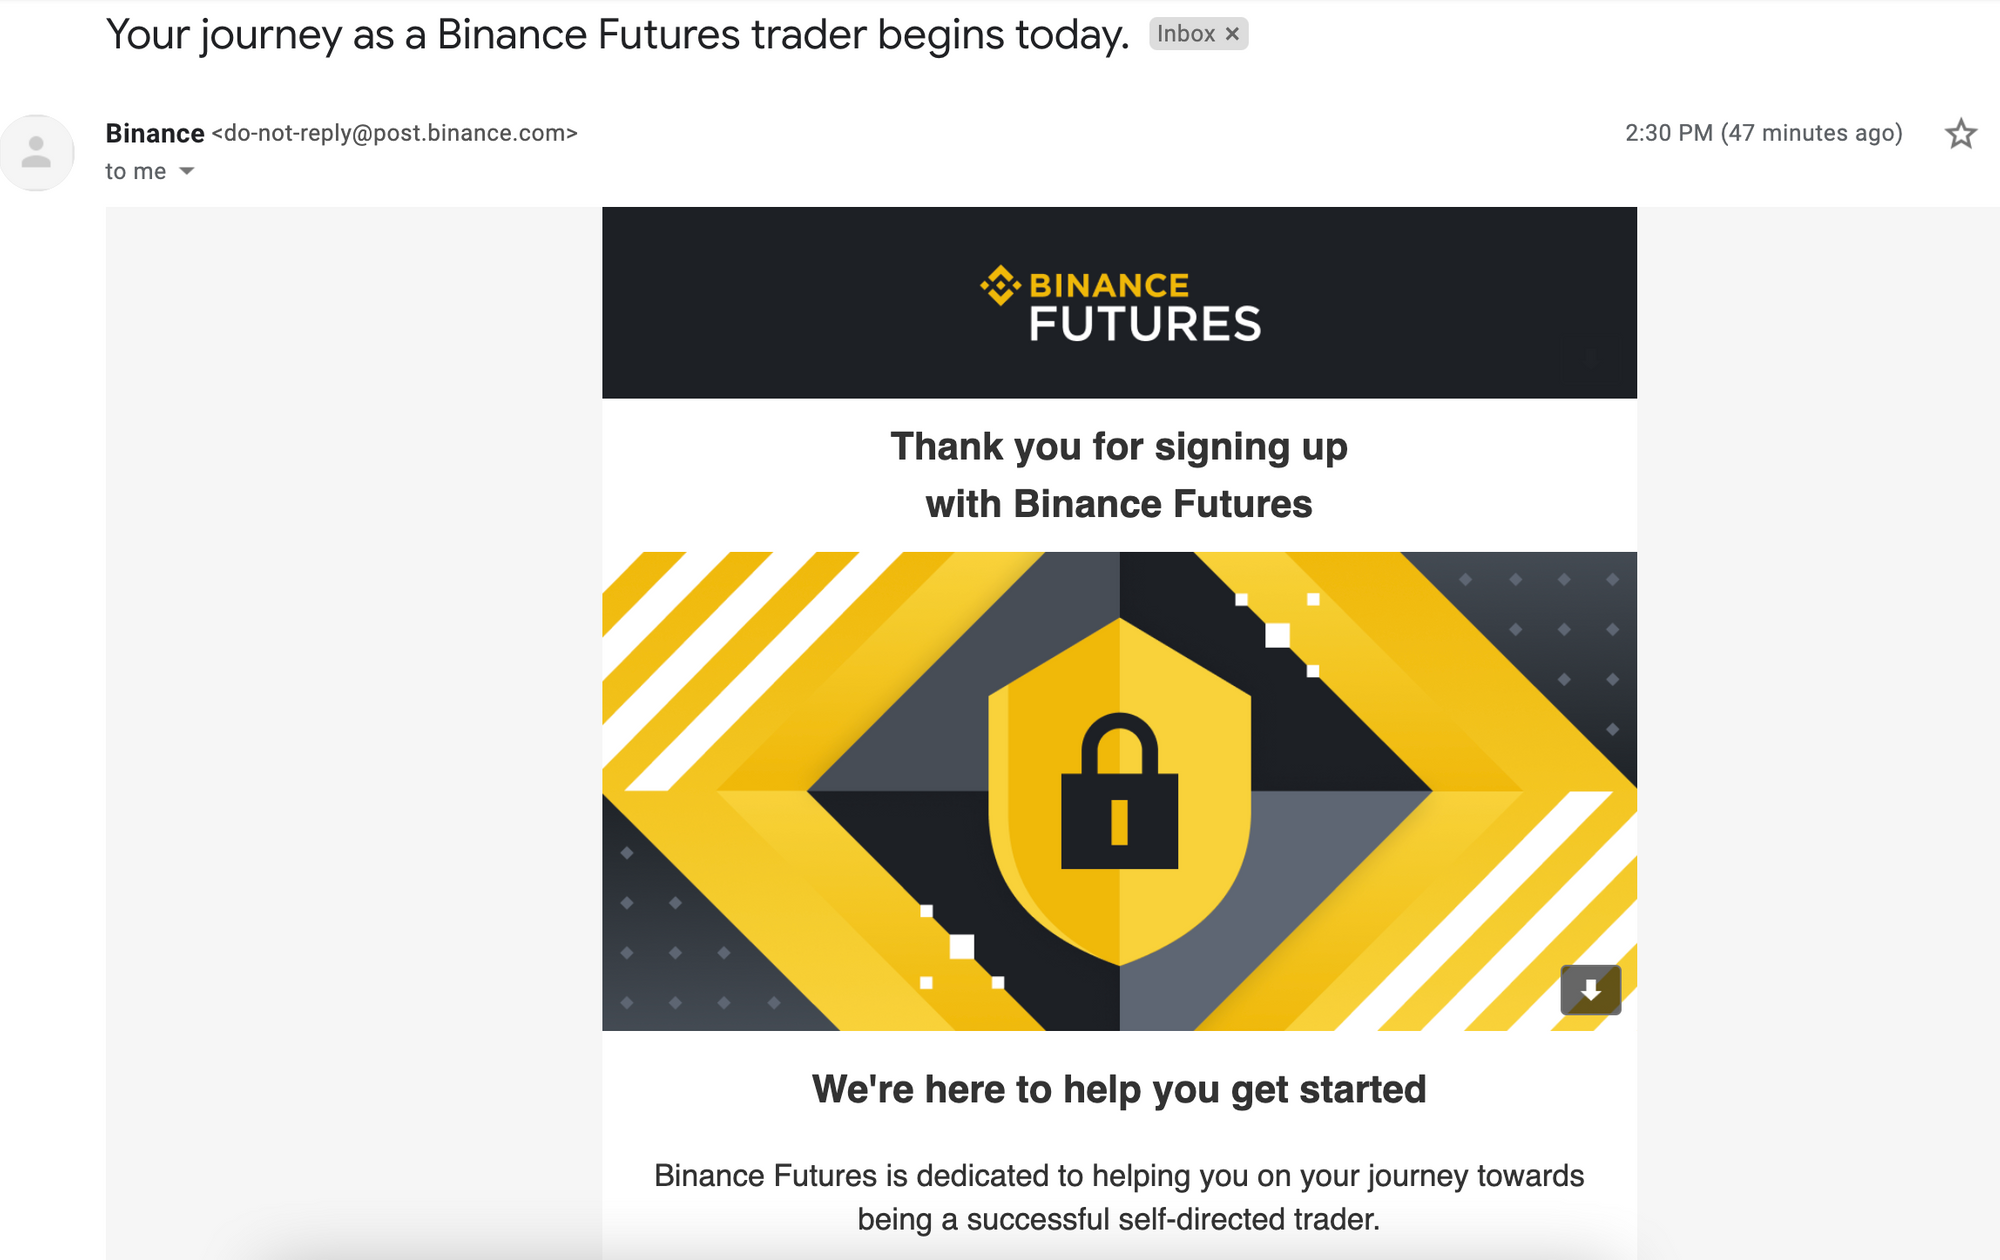 How to activate your Binance Futures account